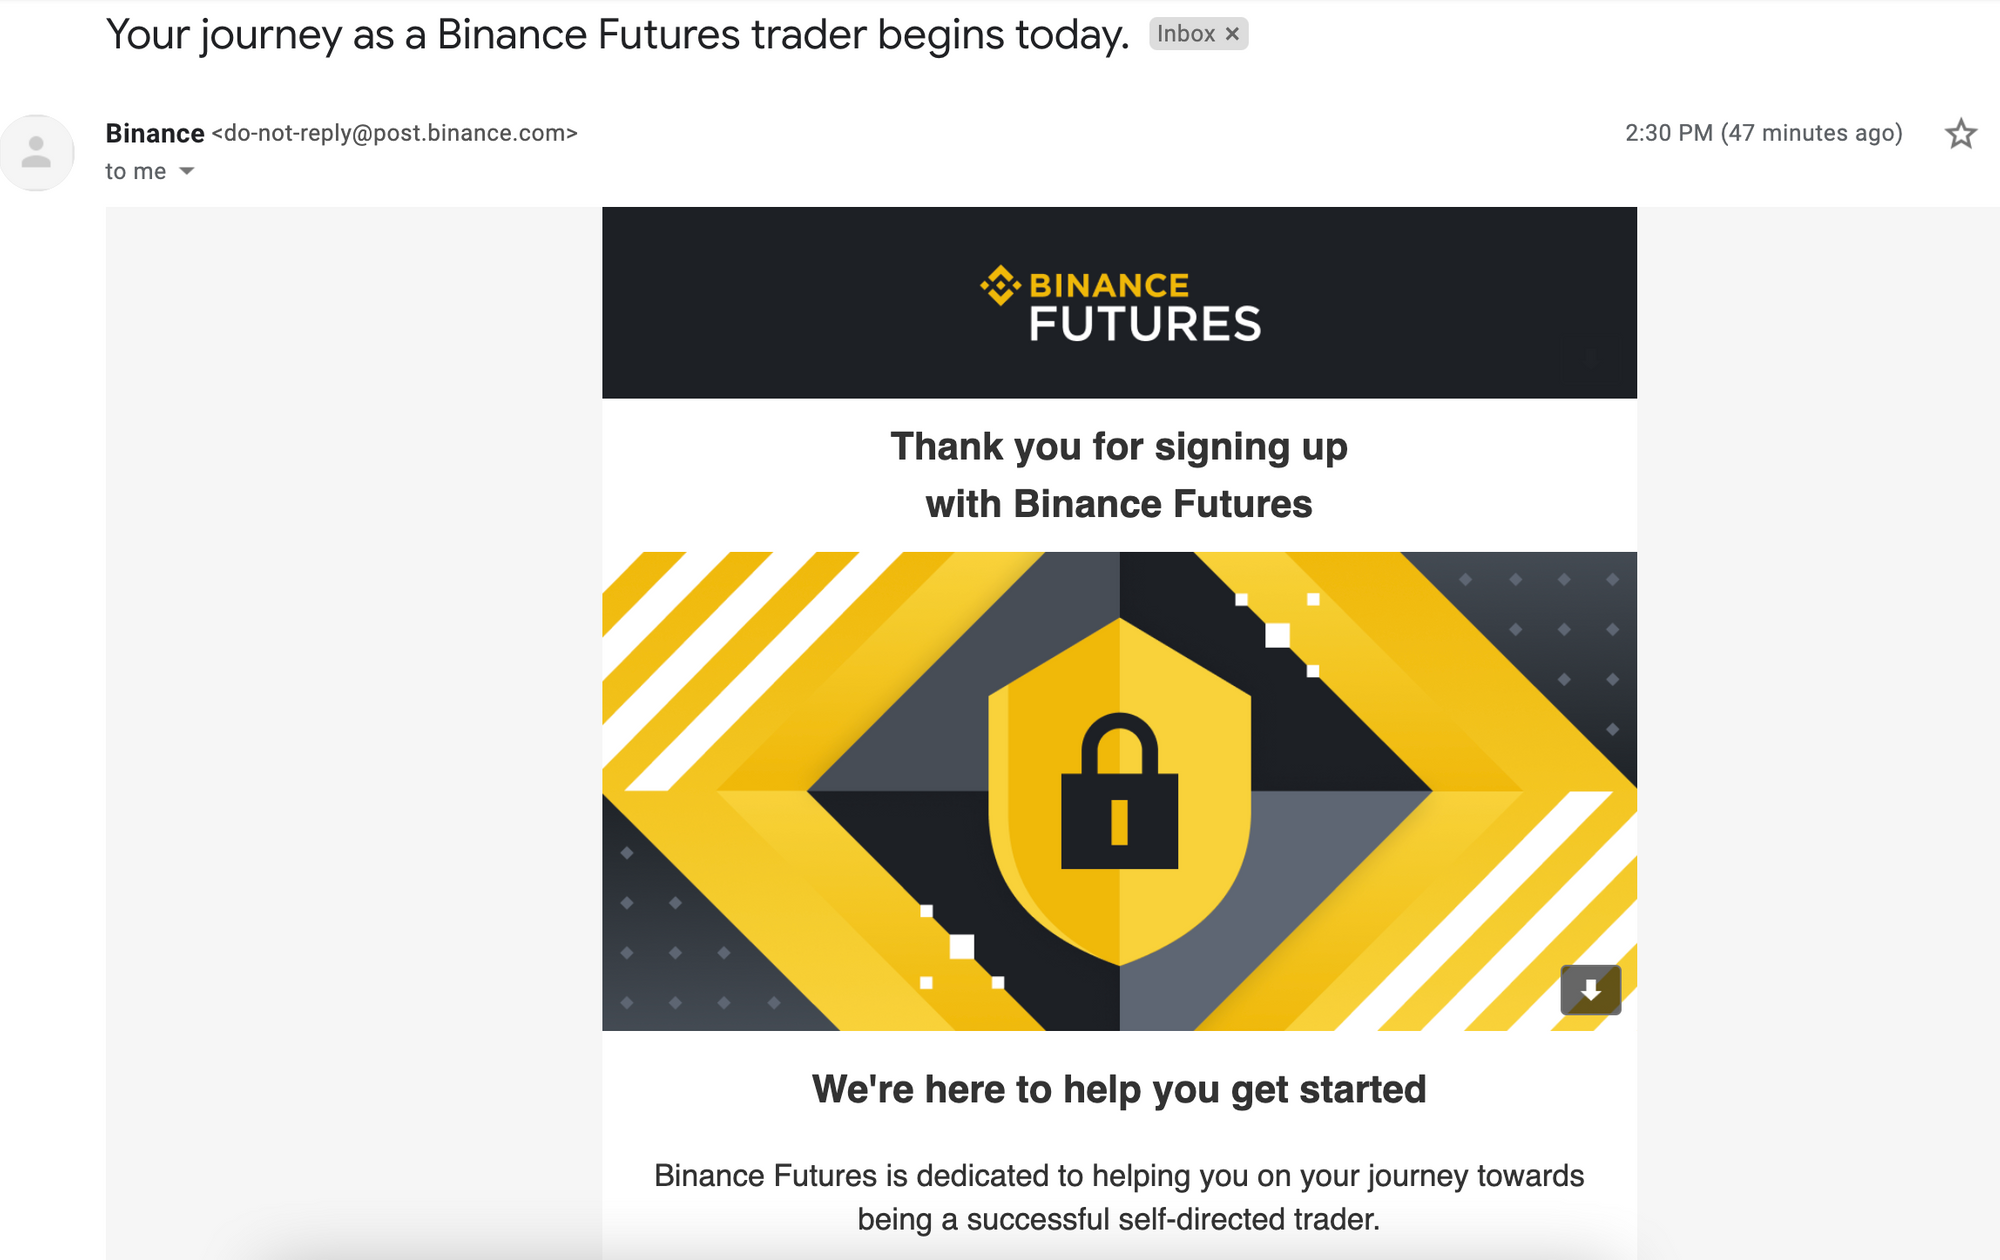 How to activate your Binance Futures account